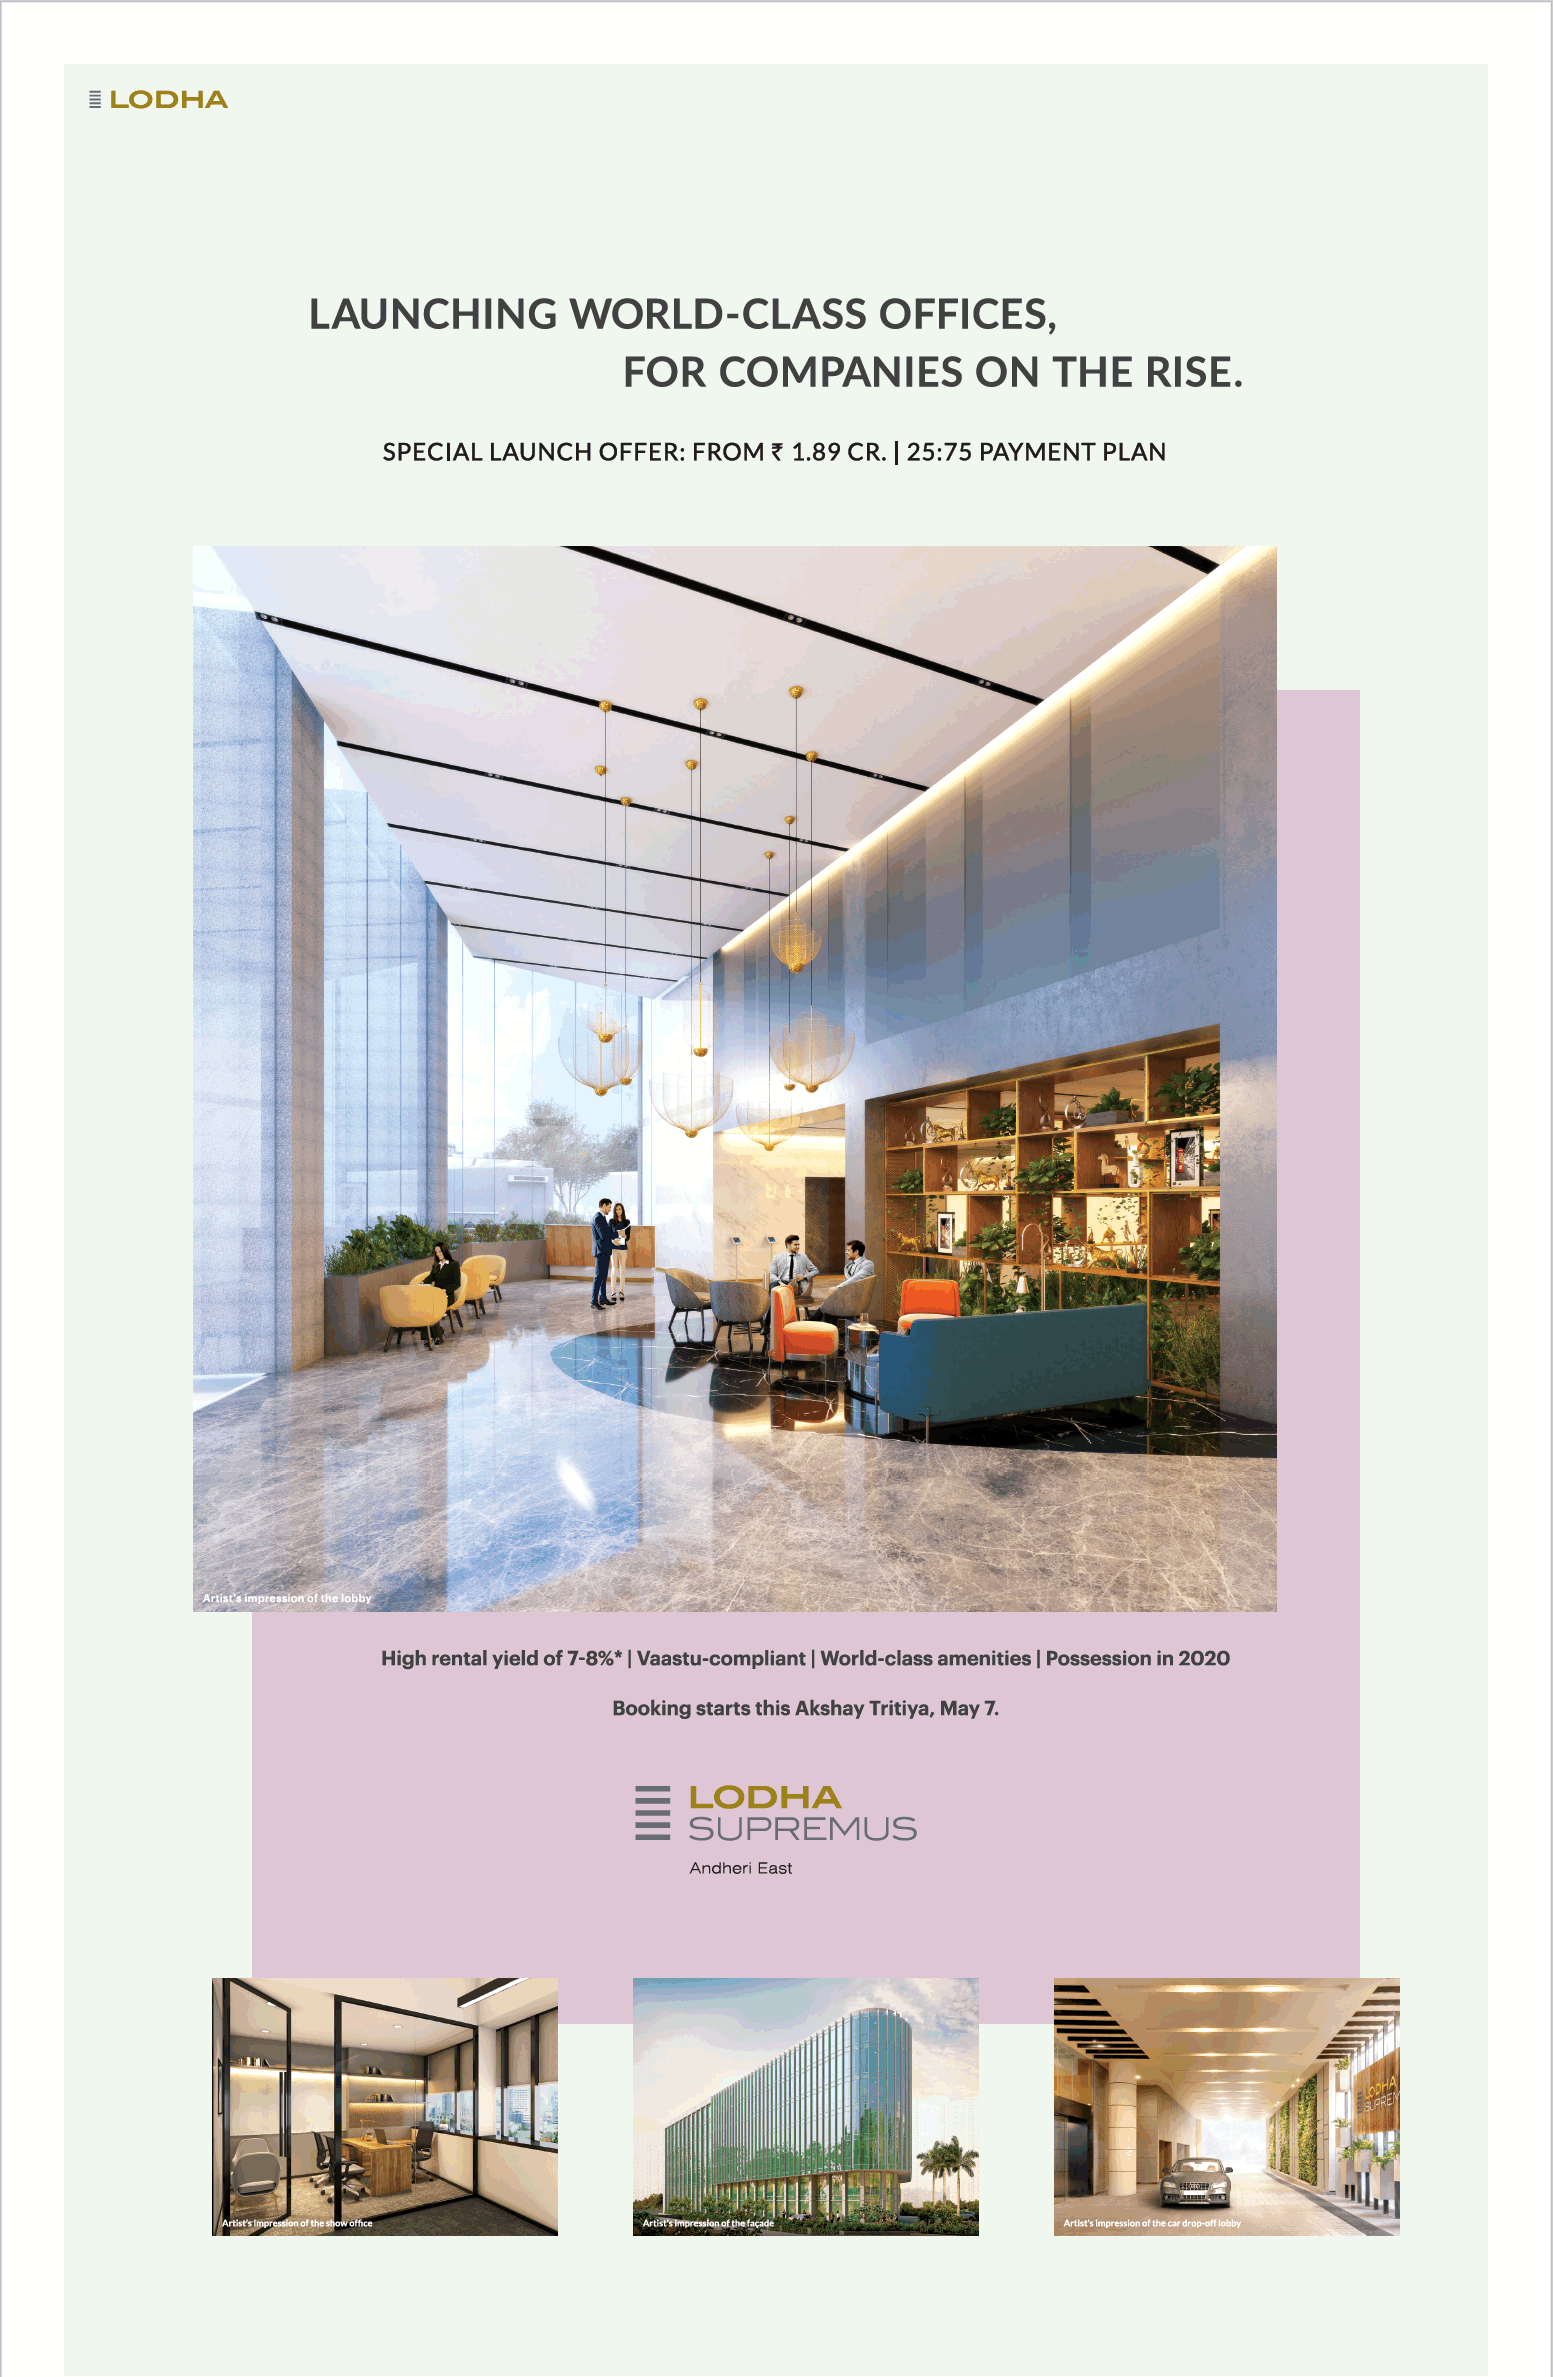 Avail special launch offer from Rs. 1.89 Cr. at Lodha Supremus in Mumbai Update